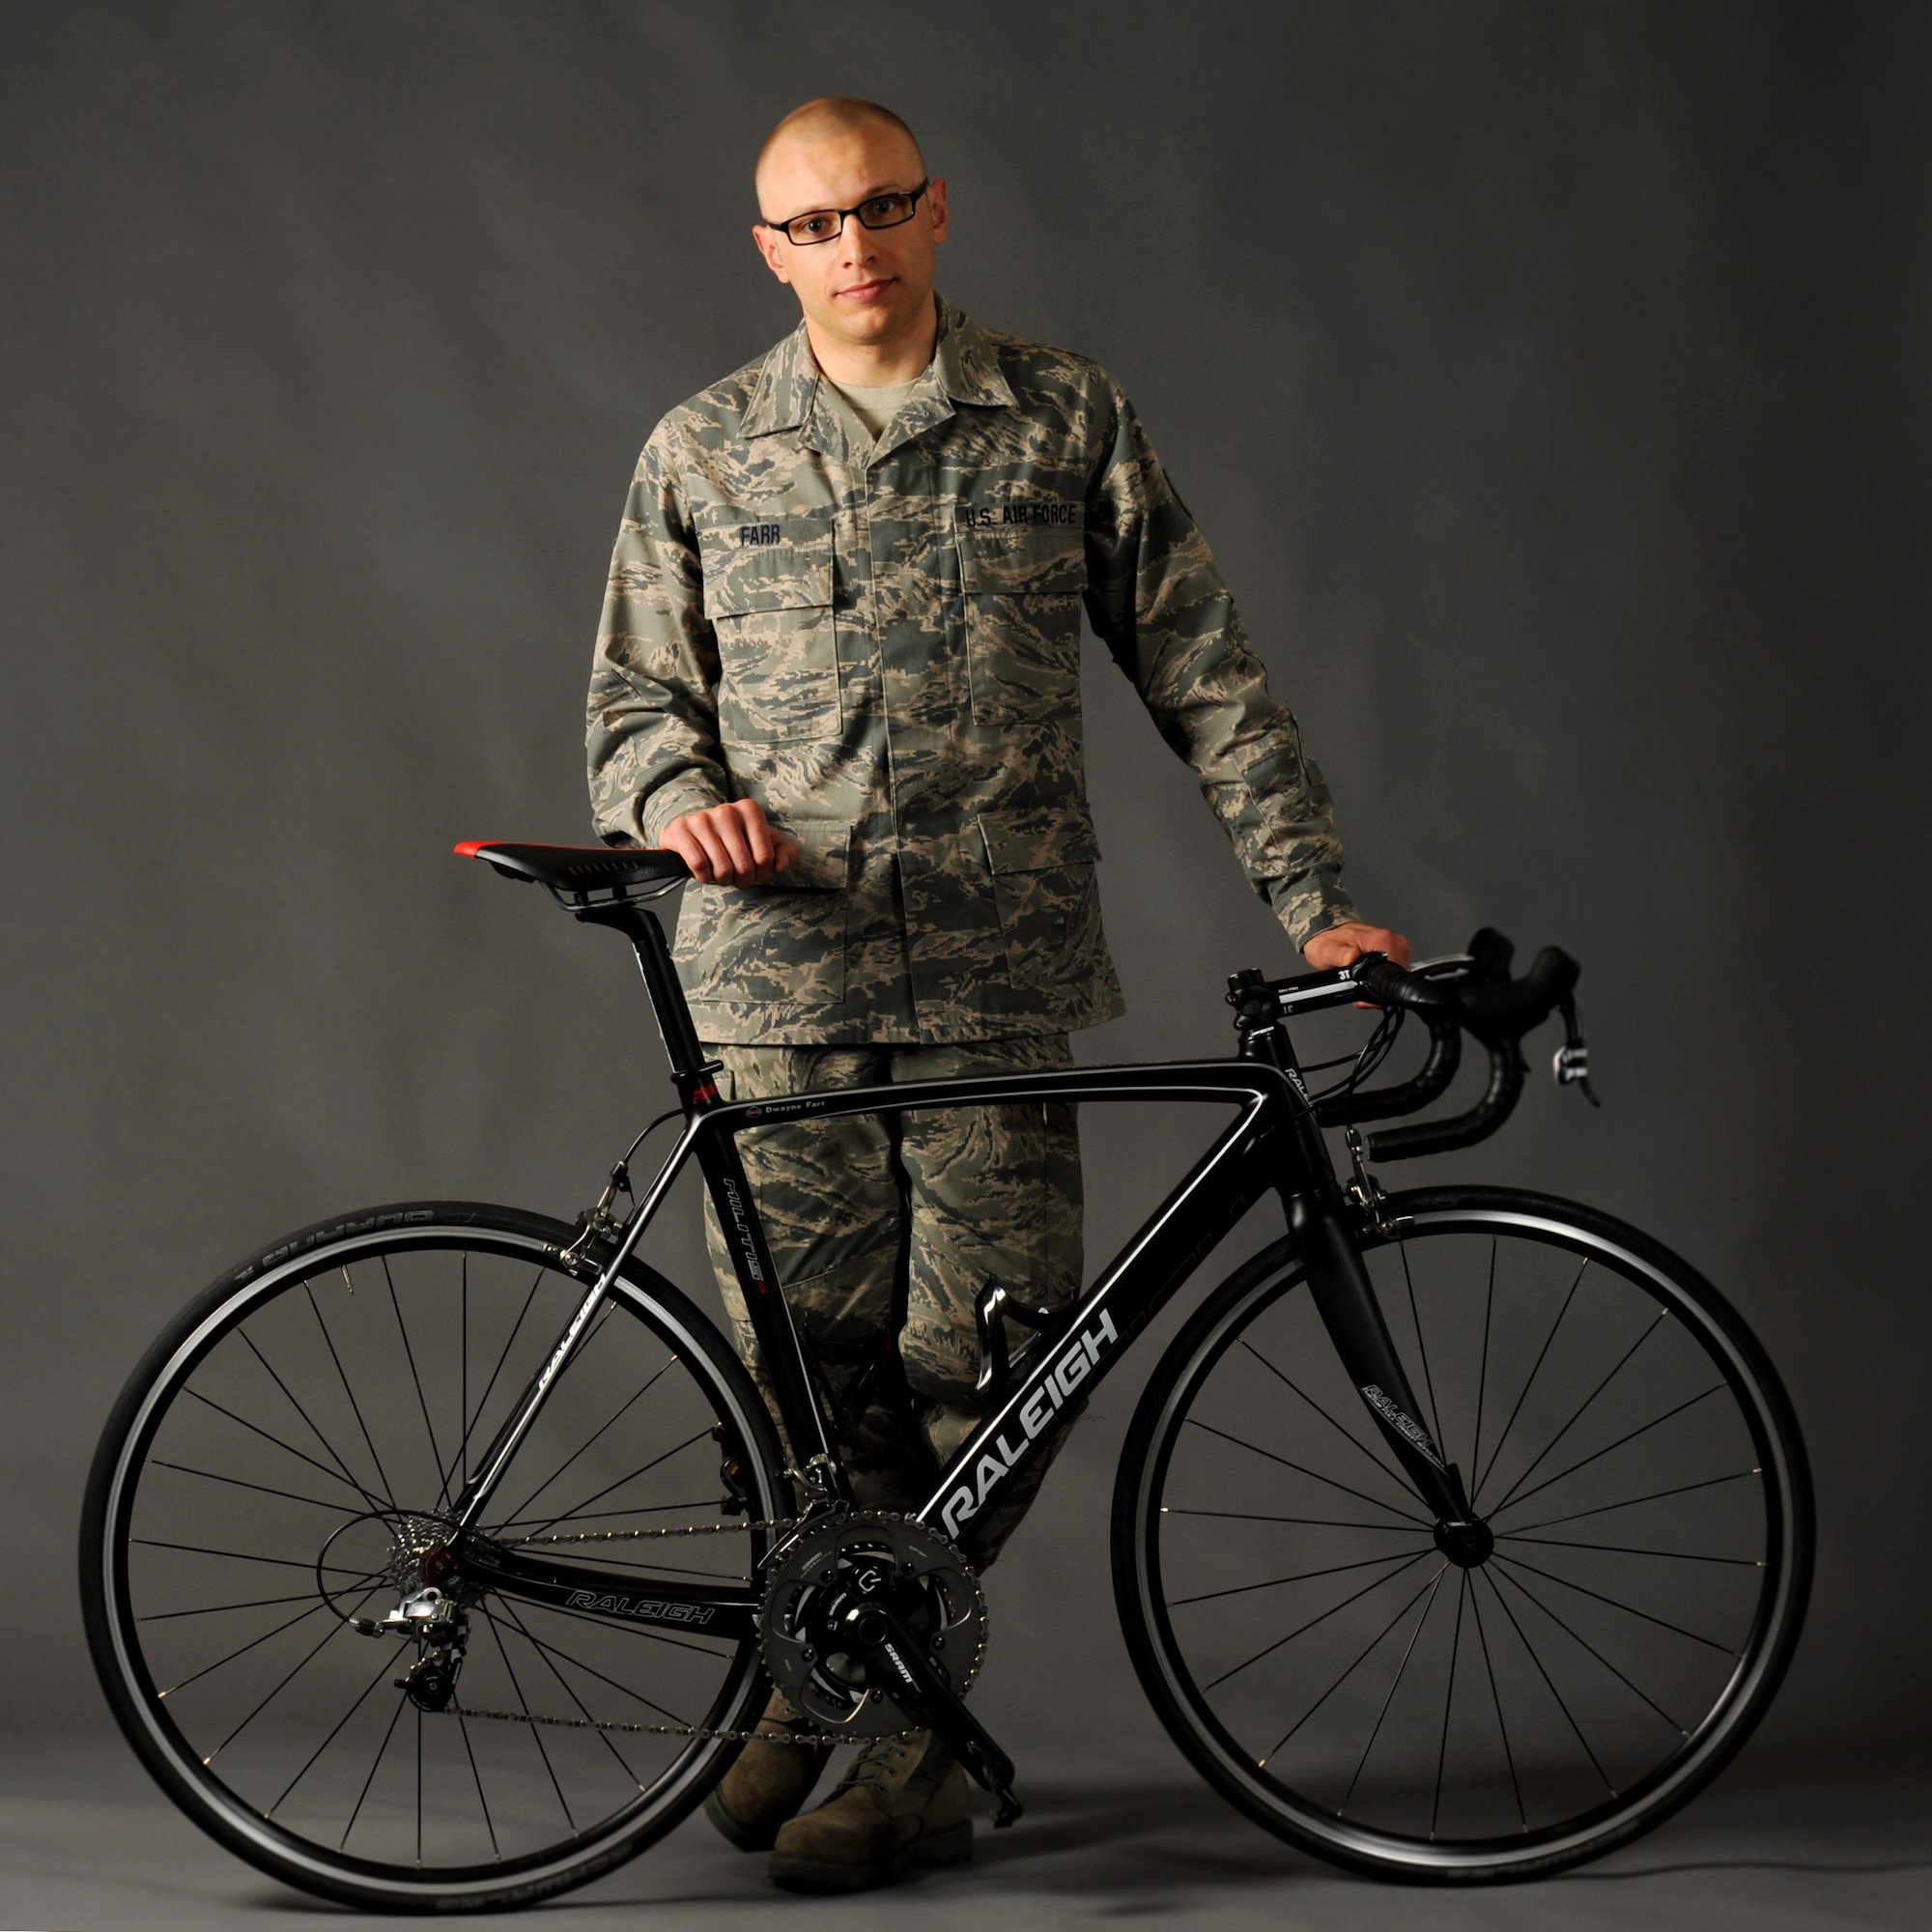 Oregon Air National Guard Tech. Sgt. Dwayne Farr, assigned to the 142nd Fighter Wing Aircraft Maintenance Squadron, poses with one of his bicycles during a photo shoot at the air base Public Affairs office, Portland Air National Guard Base, Ore., April 7, 2013. Farr has been training and racing as an endurance cyclist during the past four years and was part of the Military World Games in Mungyeoung, Korea, October 6, 2015. (U.S. Air National Guard photo by Tech. Sgt. John Hughel, 142nd Fighter Wing Public Affairs/Released)